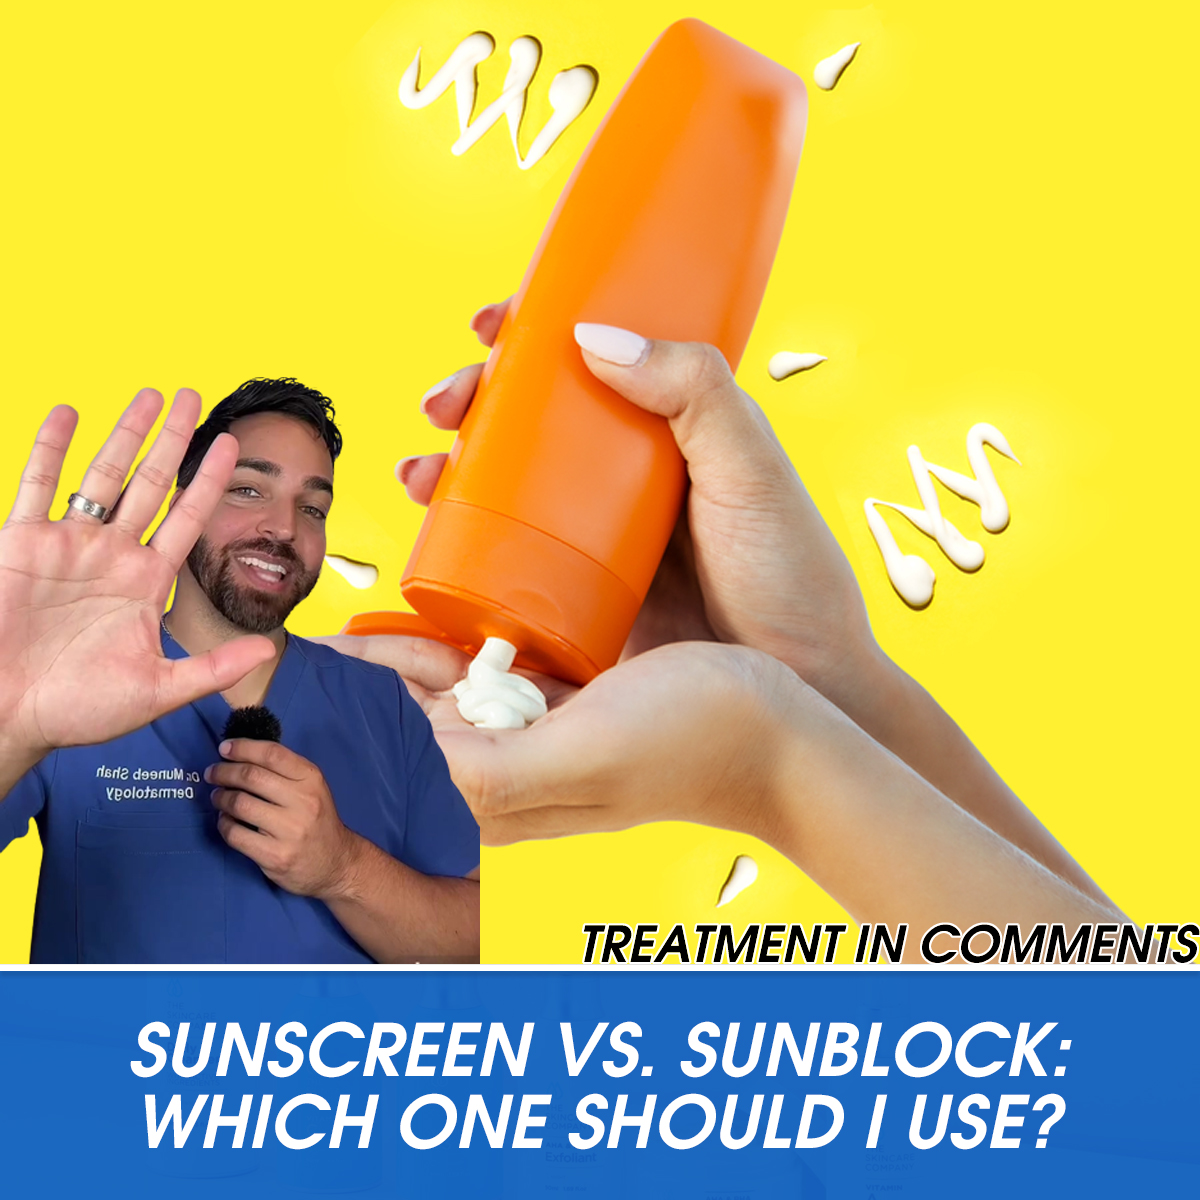 Sunscreen vs. Sunblock: Which One Should I Use?